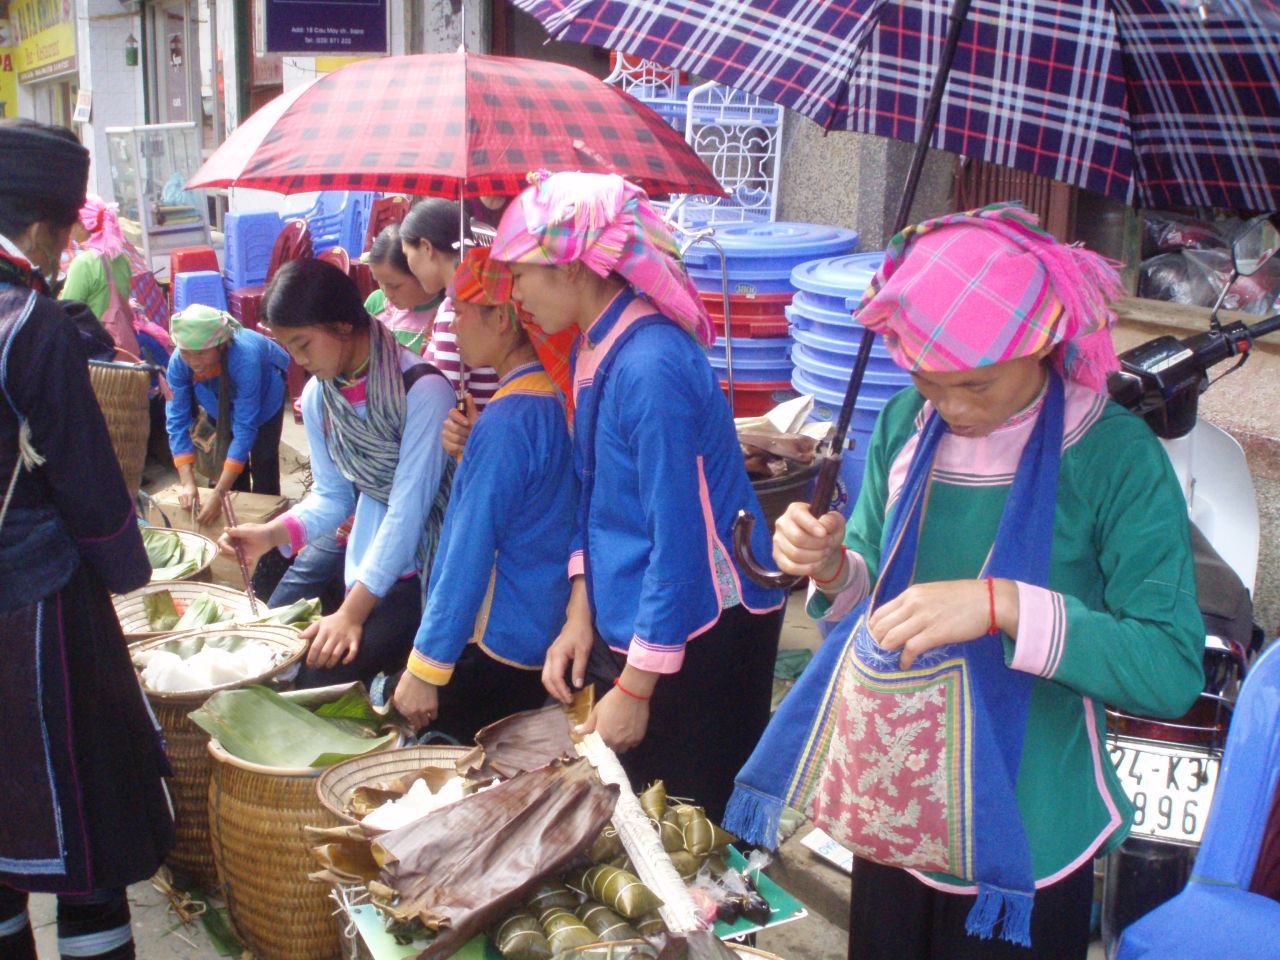 Vietnamese women sell rice at a market stall. The country has now become the second biggest rice exporter in the world.